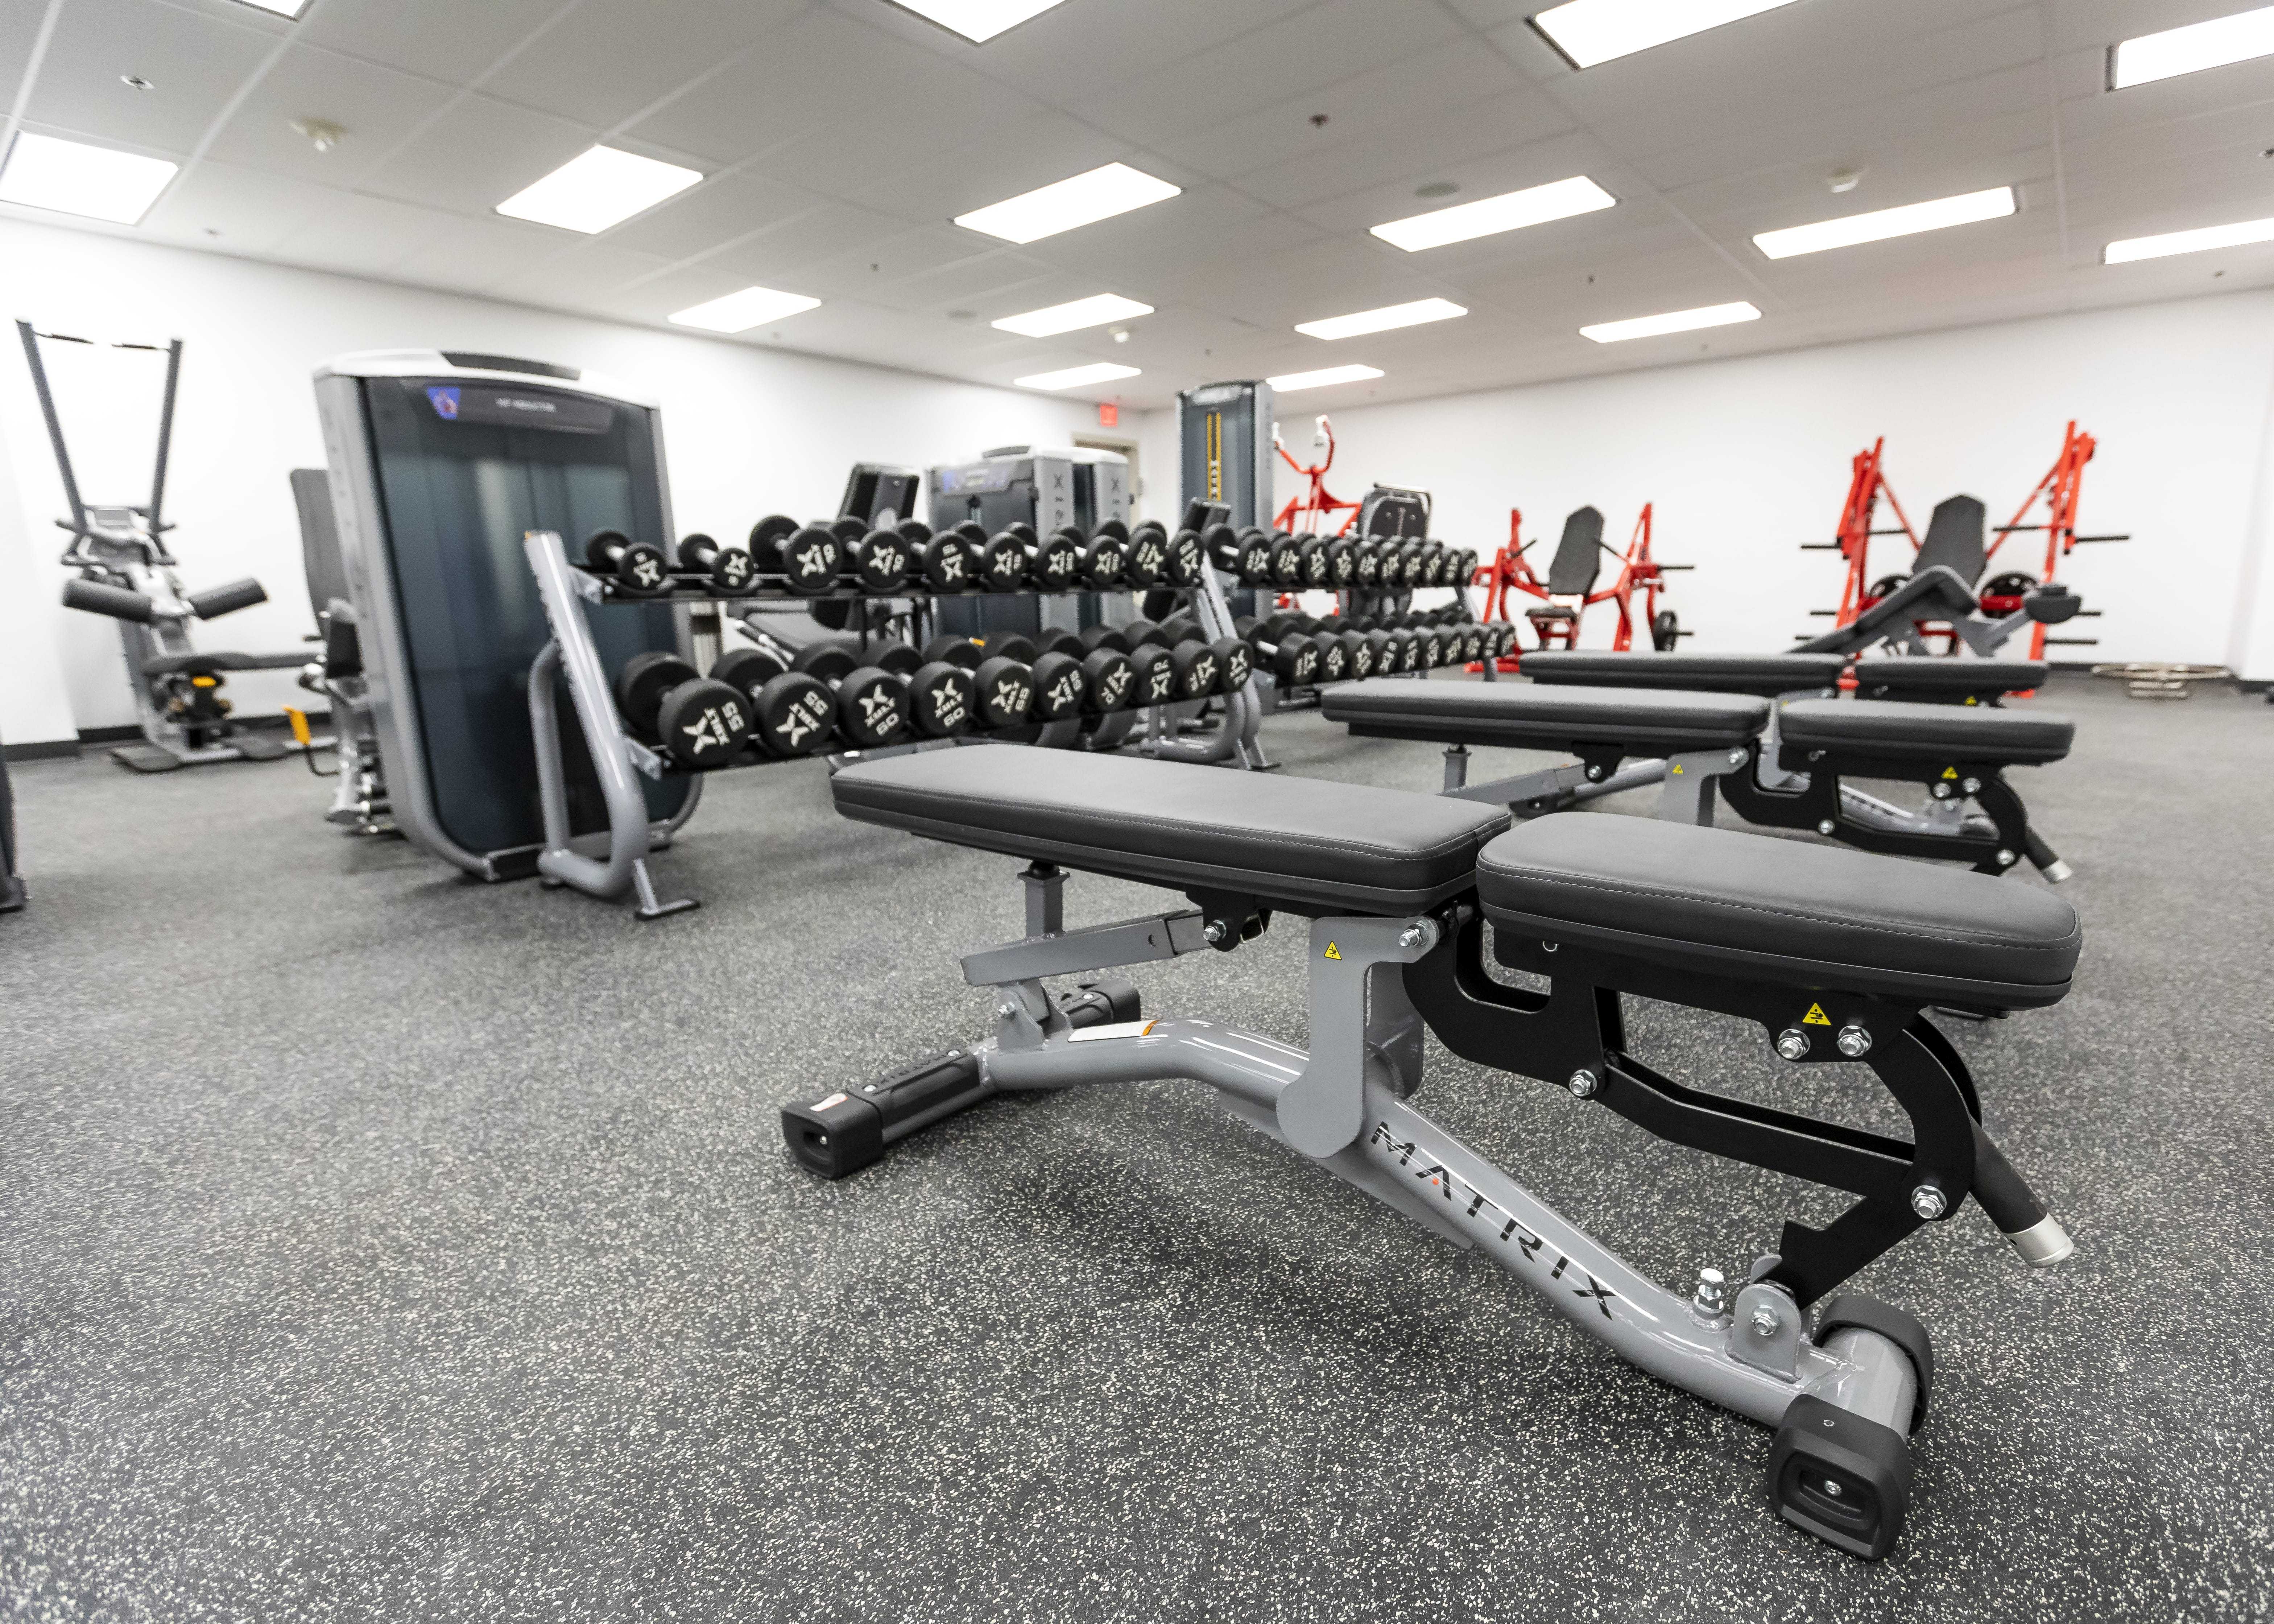 The fitness equipment at Headquarters.